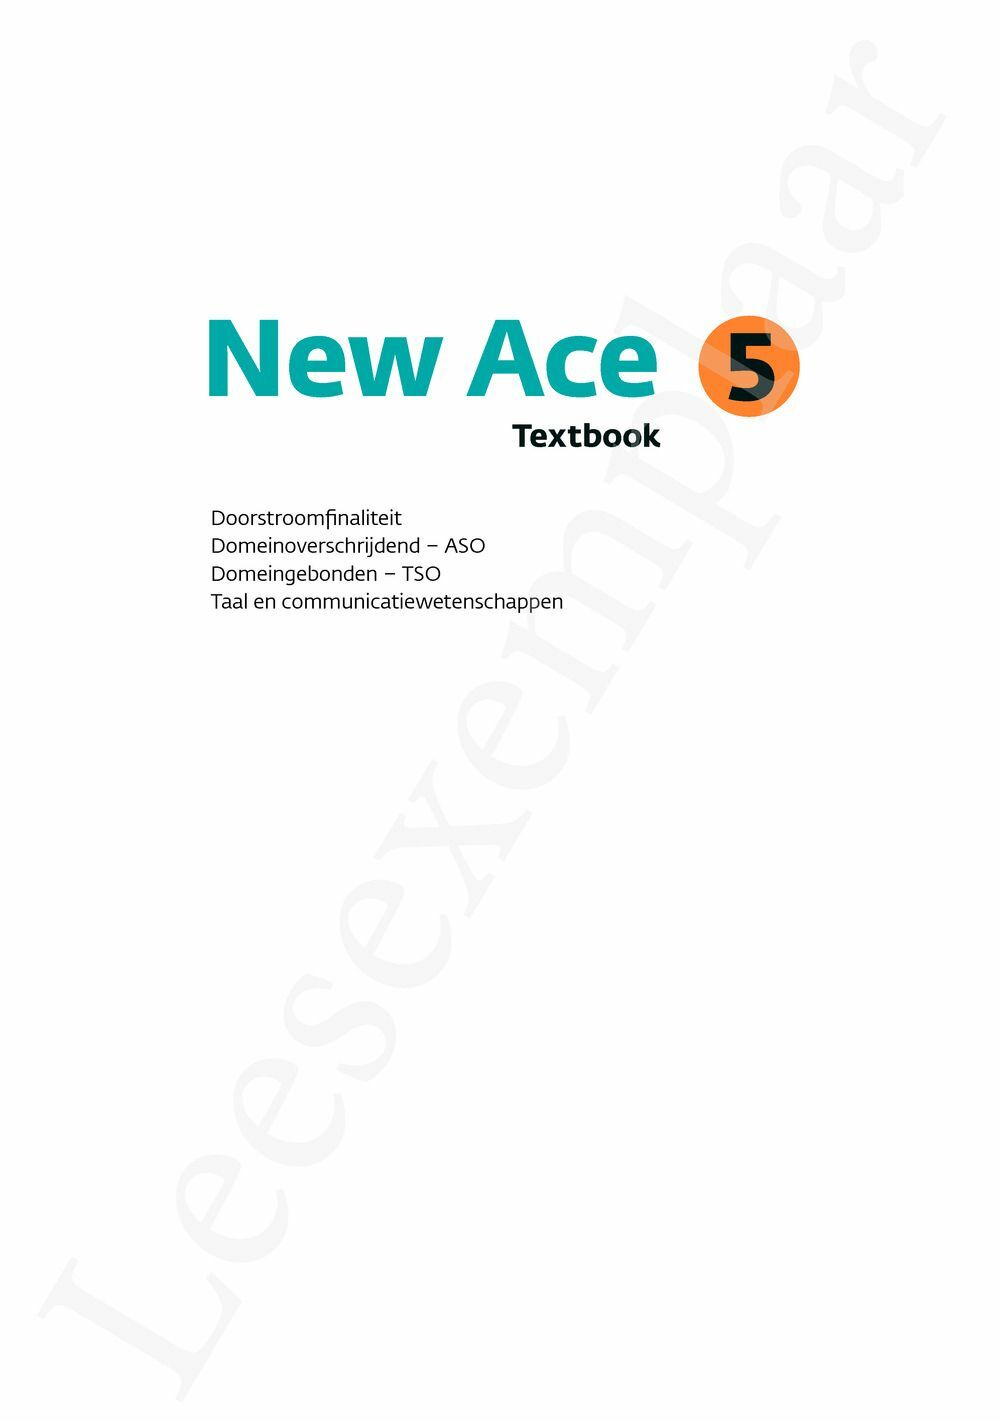 Preview: New Ace 5 Textbook (incl. Pelckmans Portaal)